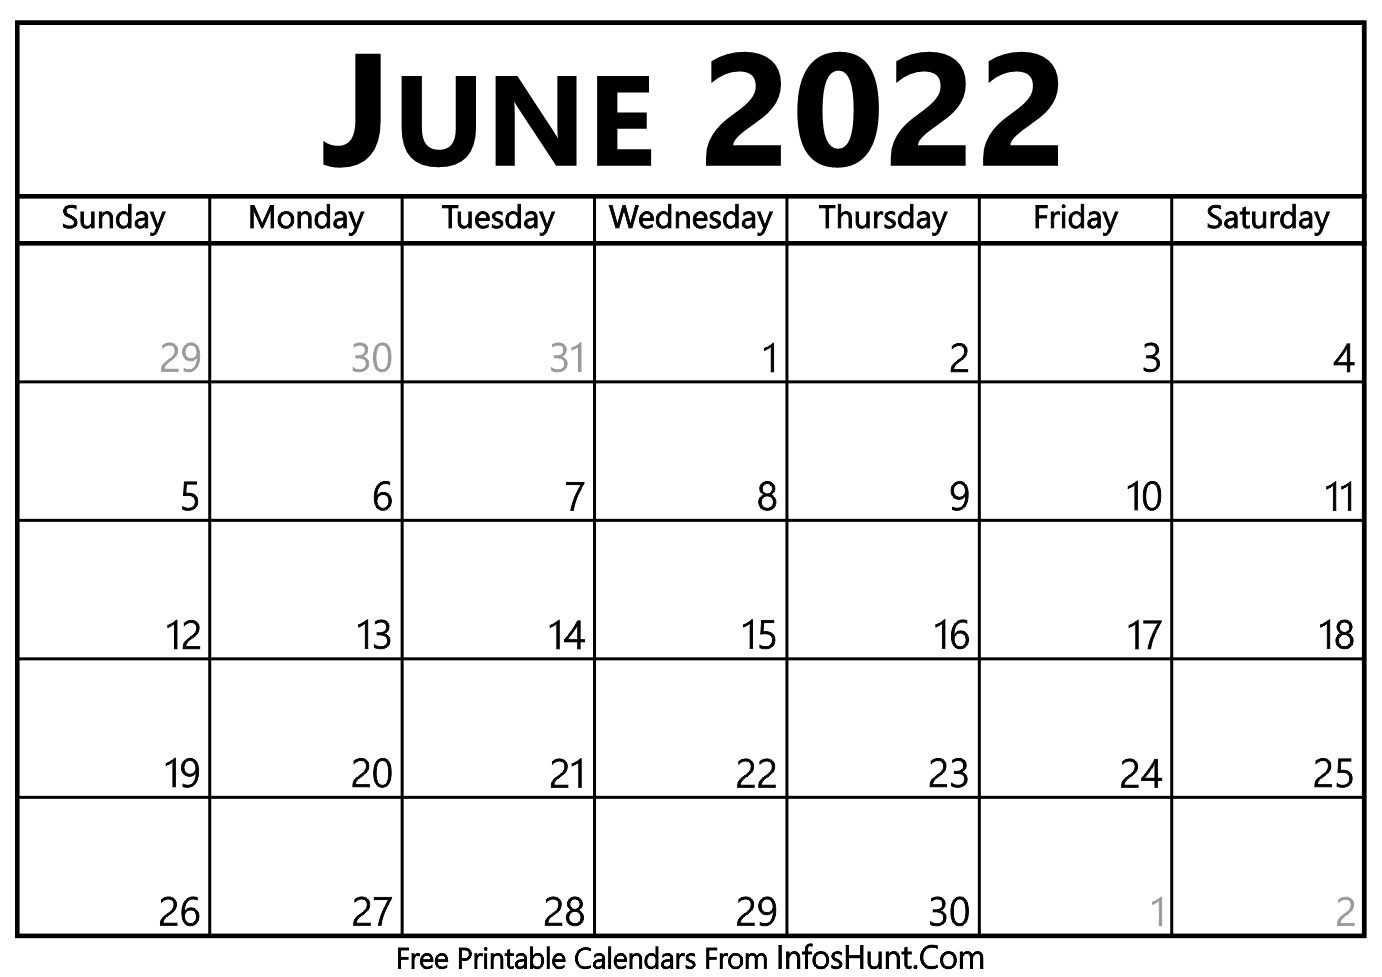 June 2022 Calendar Printable - Free Yearly &amp; Monthly